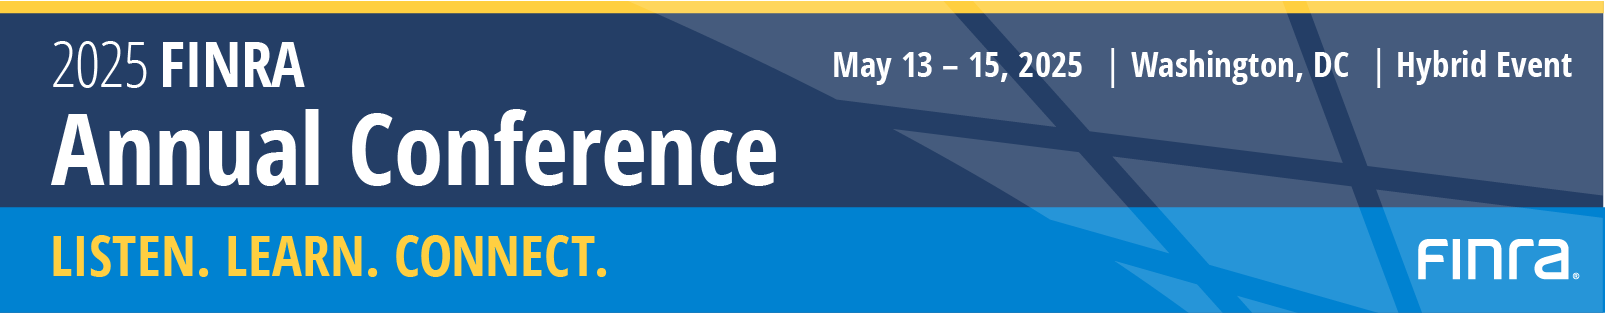 2025 FINRA Annual Conference | May 13-15 | Washington, DC